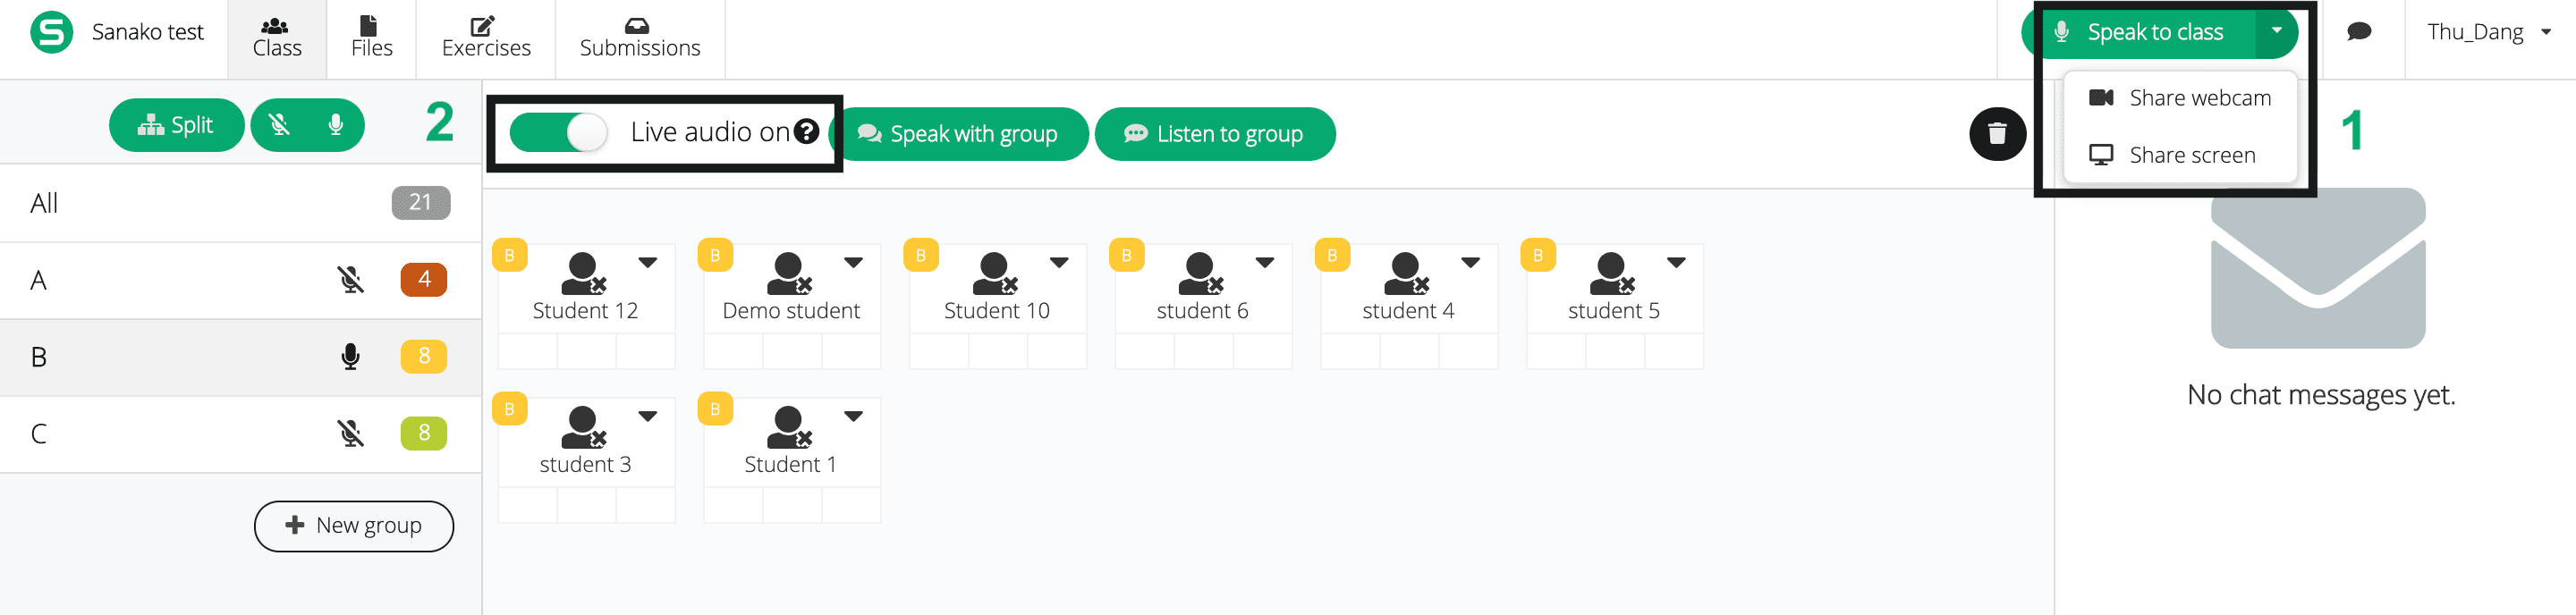 Picture showing communication options with the whole class and with a group